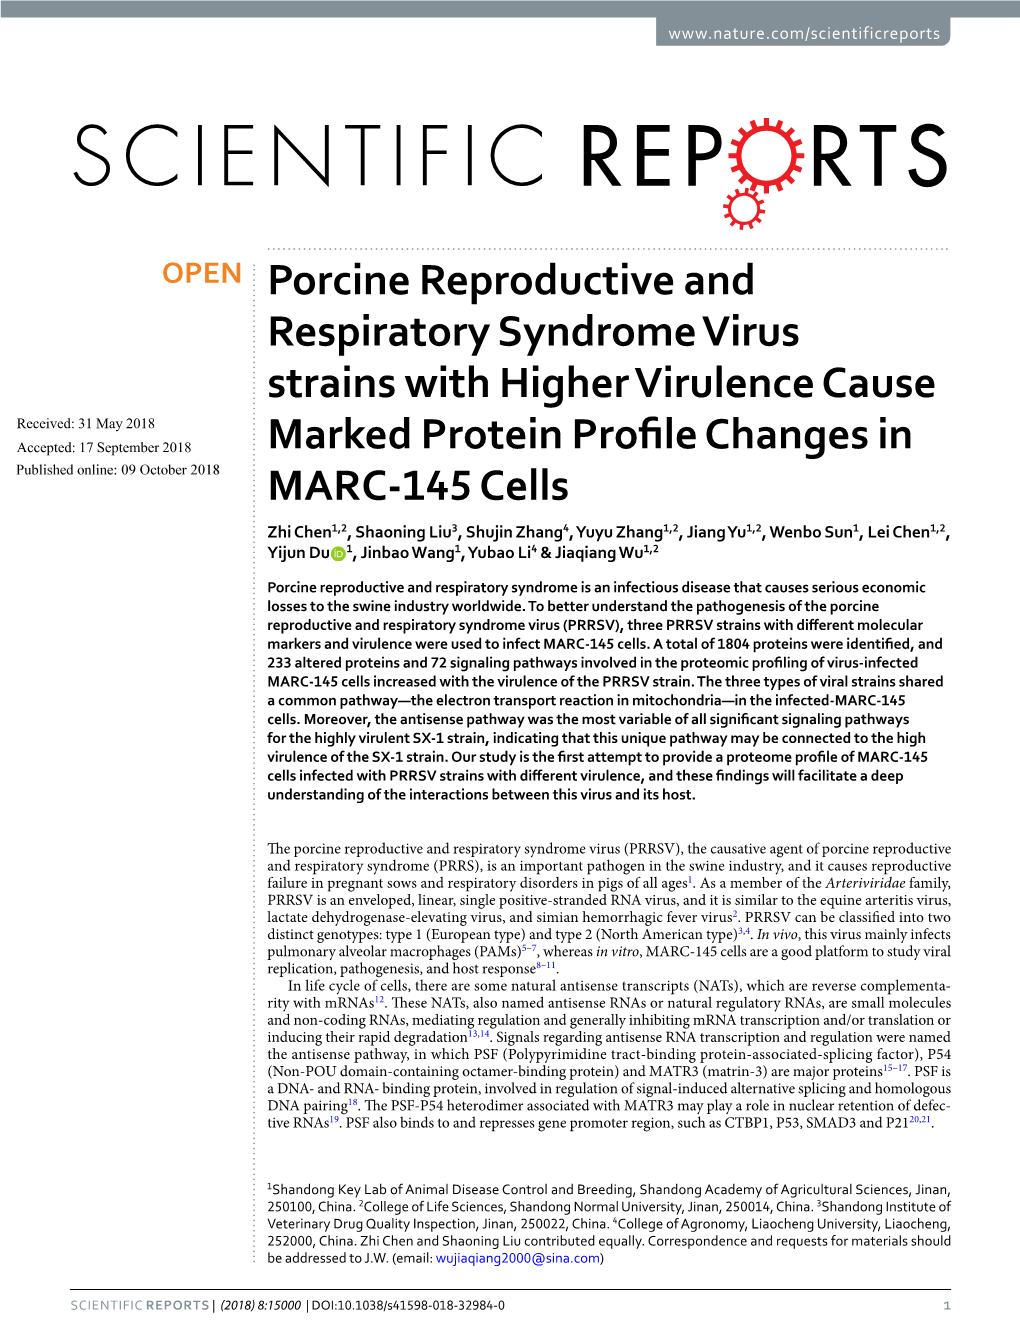 Porcine Reproductive and Respiratory Syndrome Virus Strains with Higher